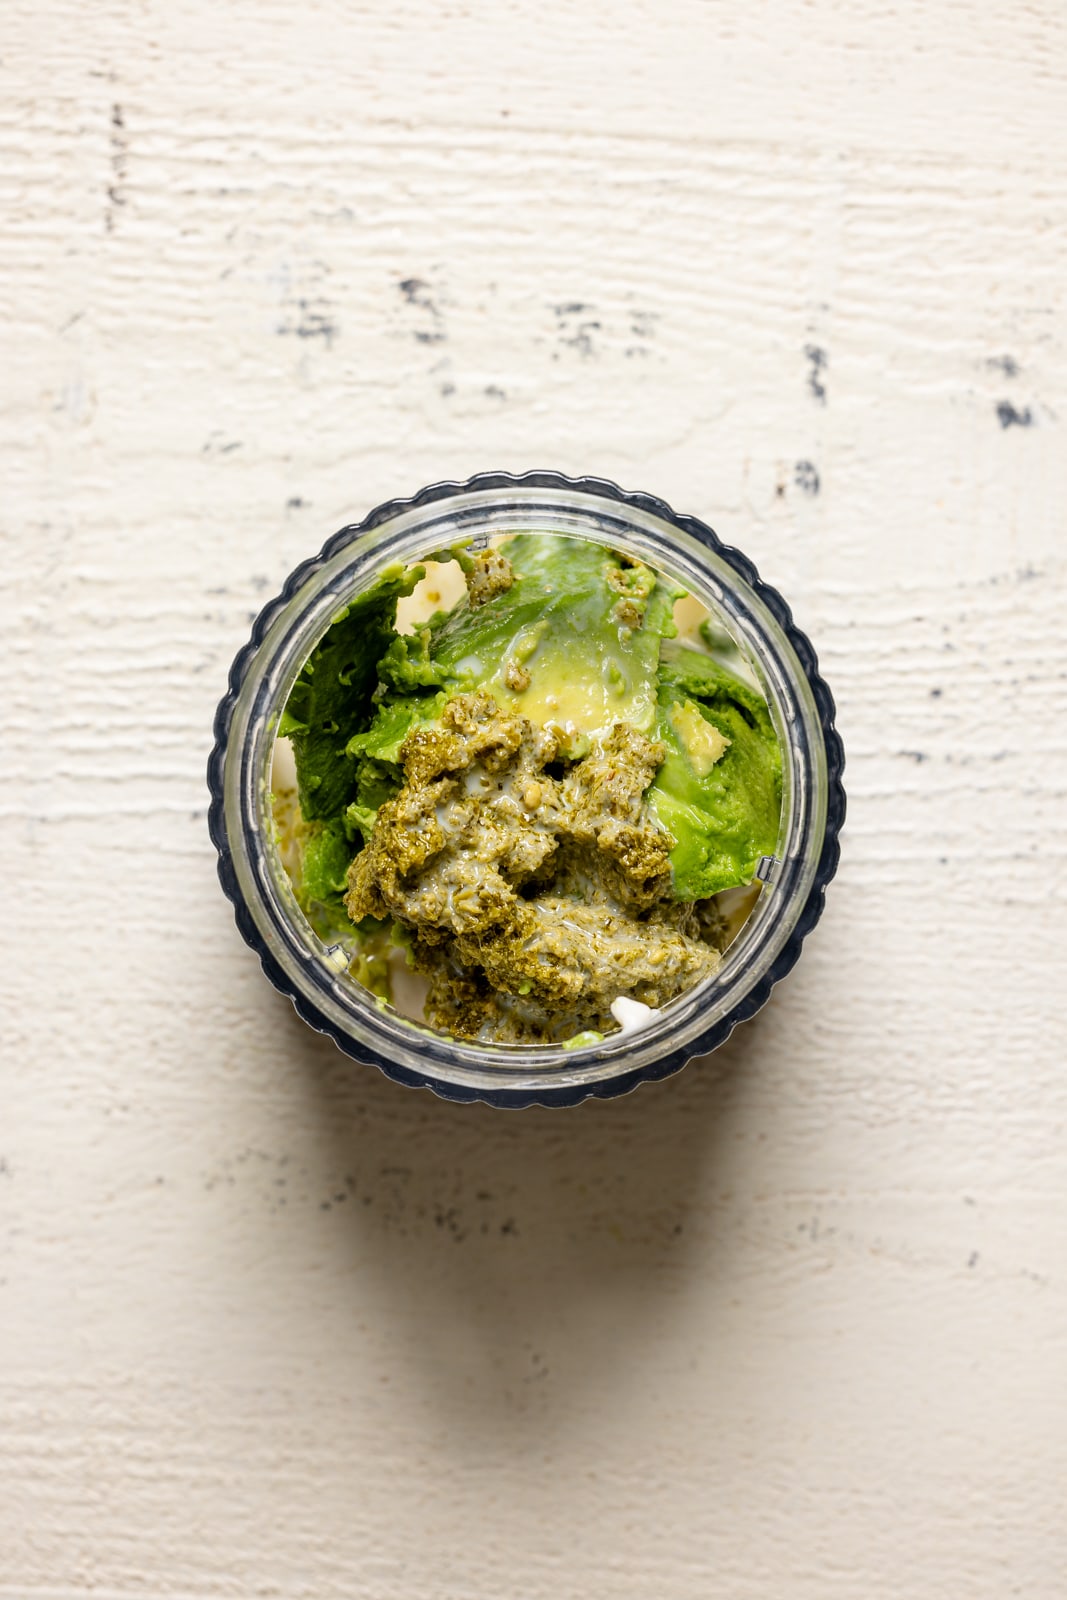 All ingredients for pesto avocado mayo in a blender on a white wood table.